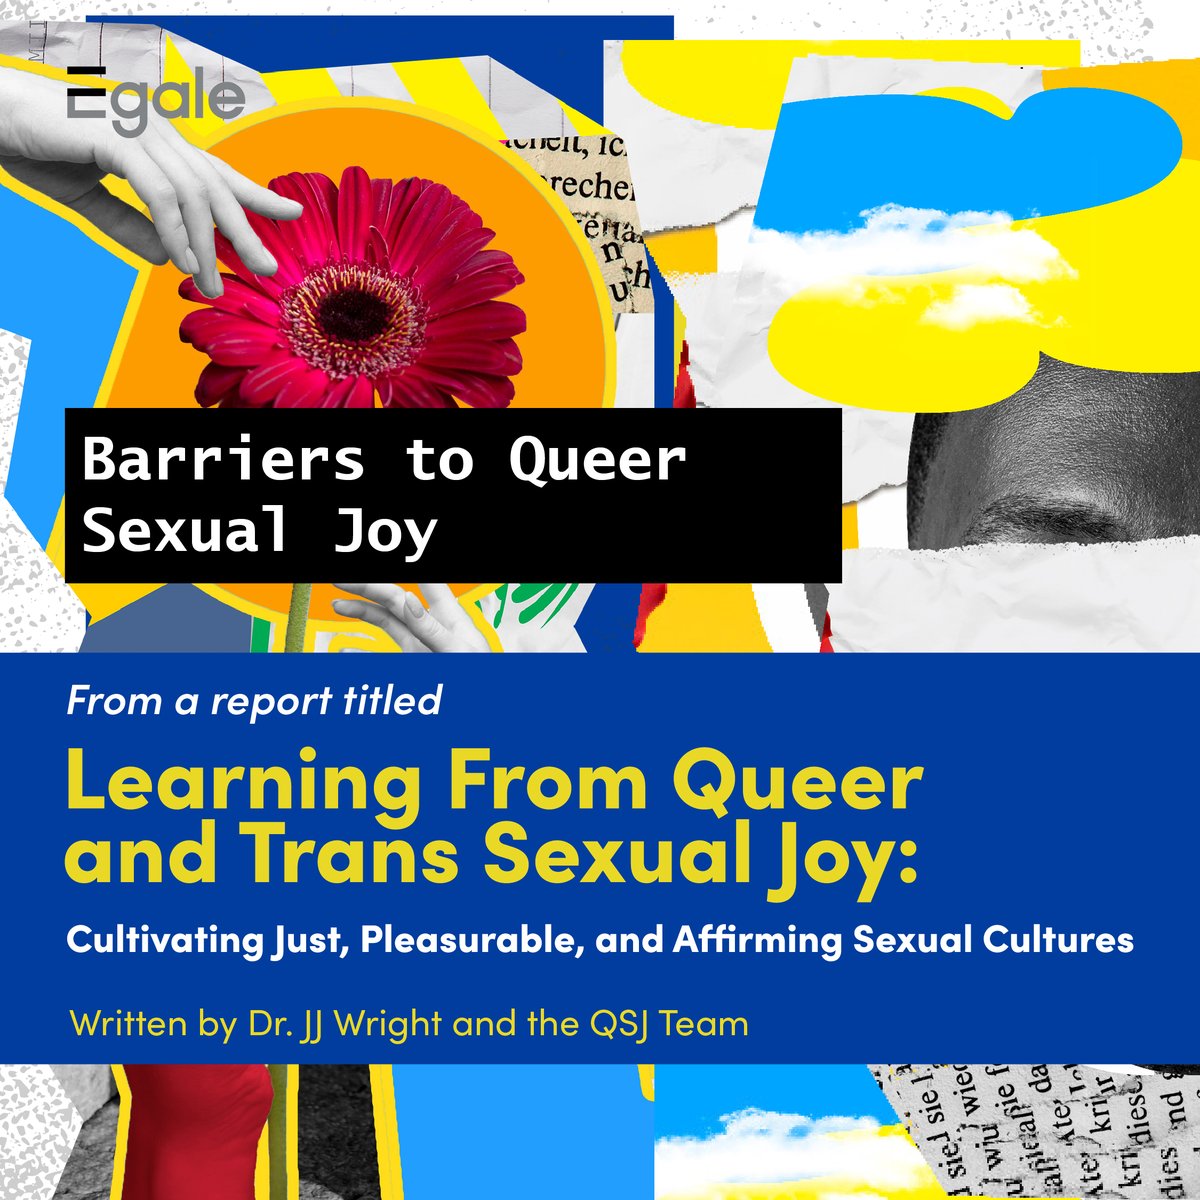 Learning From Queer and Trans Sexual Joy: Cultivating Just, Pleasurable, and Affirming Sexual Cultures, a report from a project led by @JessicaW_Tweets in collaboration with Egale Canada, describes specific phenomena that produce barriers to experiencing queer sexual joy.